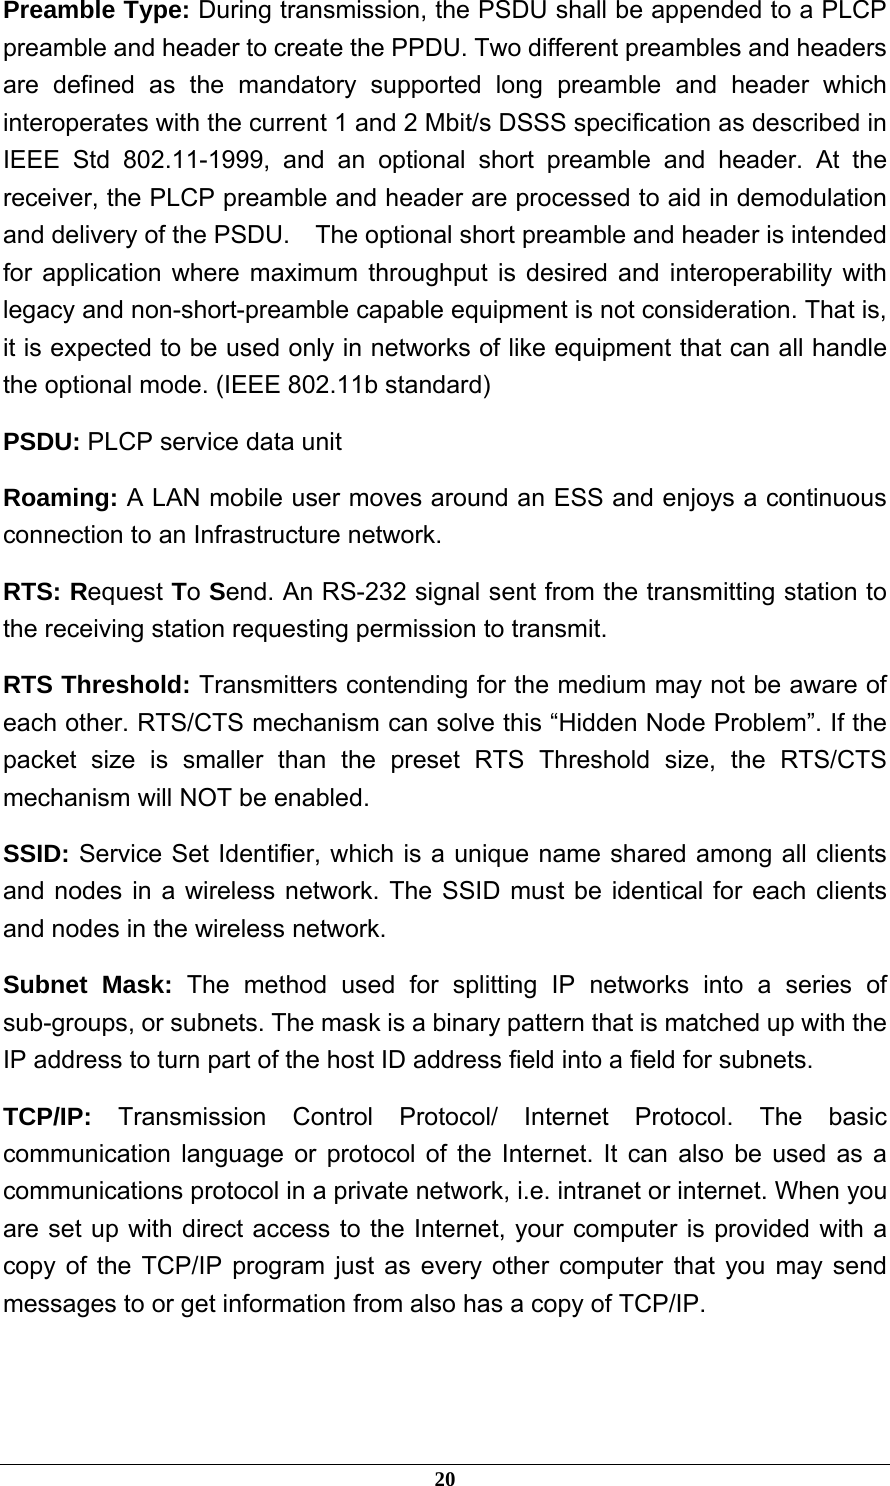  Preamble Type: During transmission, the PSDU shall be appended to a PLCP preamble and header to create the PPDU. Two different preambles and headers are defined as the mandatory supported long preamble and header which interoperates with the current 1 and 2 Mbit/s DSSS specification as described in IEEE Std 802.11-1999, and an optional short preamble and header. At the receiver, the PLCP preamble and header are processed to aid in demodulation and delivery of the PSDU.    The optional short preamble and header is intended for application where maximum throughput is desired and interoperability with legacy and non-short-preamble capable equipment is not consideration. That is, it is expected to be used only in networks of like equipment that can all handle the optional mode. (IEEE 802.11b standard) PSDU: PLCP service data unit Roaming: A LAN mobile user moves around an ESS and enjoys a continuous connection to an Infrastructure network. RTS: Request To Send. An RS-232 signal sent from the transmitting station to the receiving station requesting permission to transmit. RTS Threshold: Transmitters contending for the medium may not be aware of each other. RTS/CTS mechanism can solve this “Hidden Node Problem”. If the packet size is smaller than the preset RTS Threshold size, the RTS/CTS mechanism will NOT be enabled. SSID: Service Set Identifier, which is a unique name shared among all clients and nodes in a wireless network. The SSID must be identical for each clients and nodes in the wireless network. Subnet Mask: The method used for splitting IP networks into a series of sub-groups, or subnets. The mask is a binary pattern that is matched up with the IP address to turn part of the host ID address field into a field for subnets. TCP/IP:  Transmission Control Protocol/ Internet Protocol. The basic communication language or protocol of the Internet. It can also be used as a communications protocol in a private network, i.e. intranet or internet. When you are set up with direct access to the Internet, your computer is provided with a copy of the TCP/IP program just as every other computer that you may send messages to or get information from also has a copy of TCP/IP.   20 